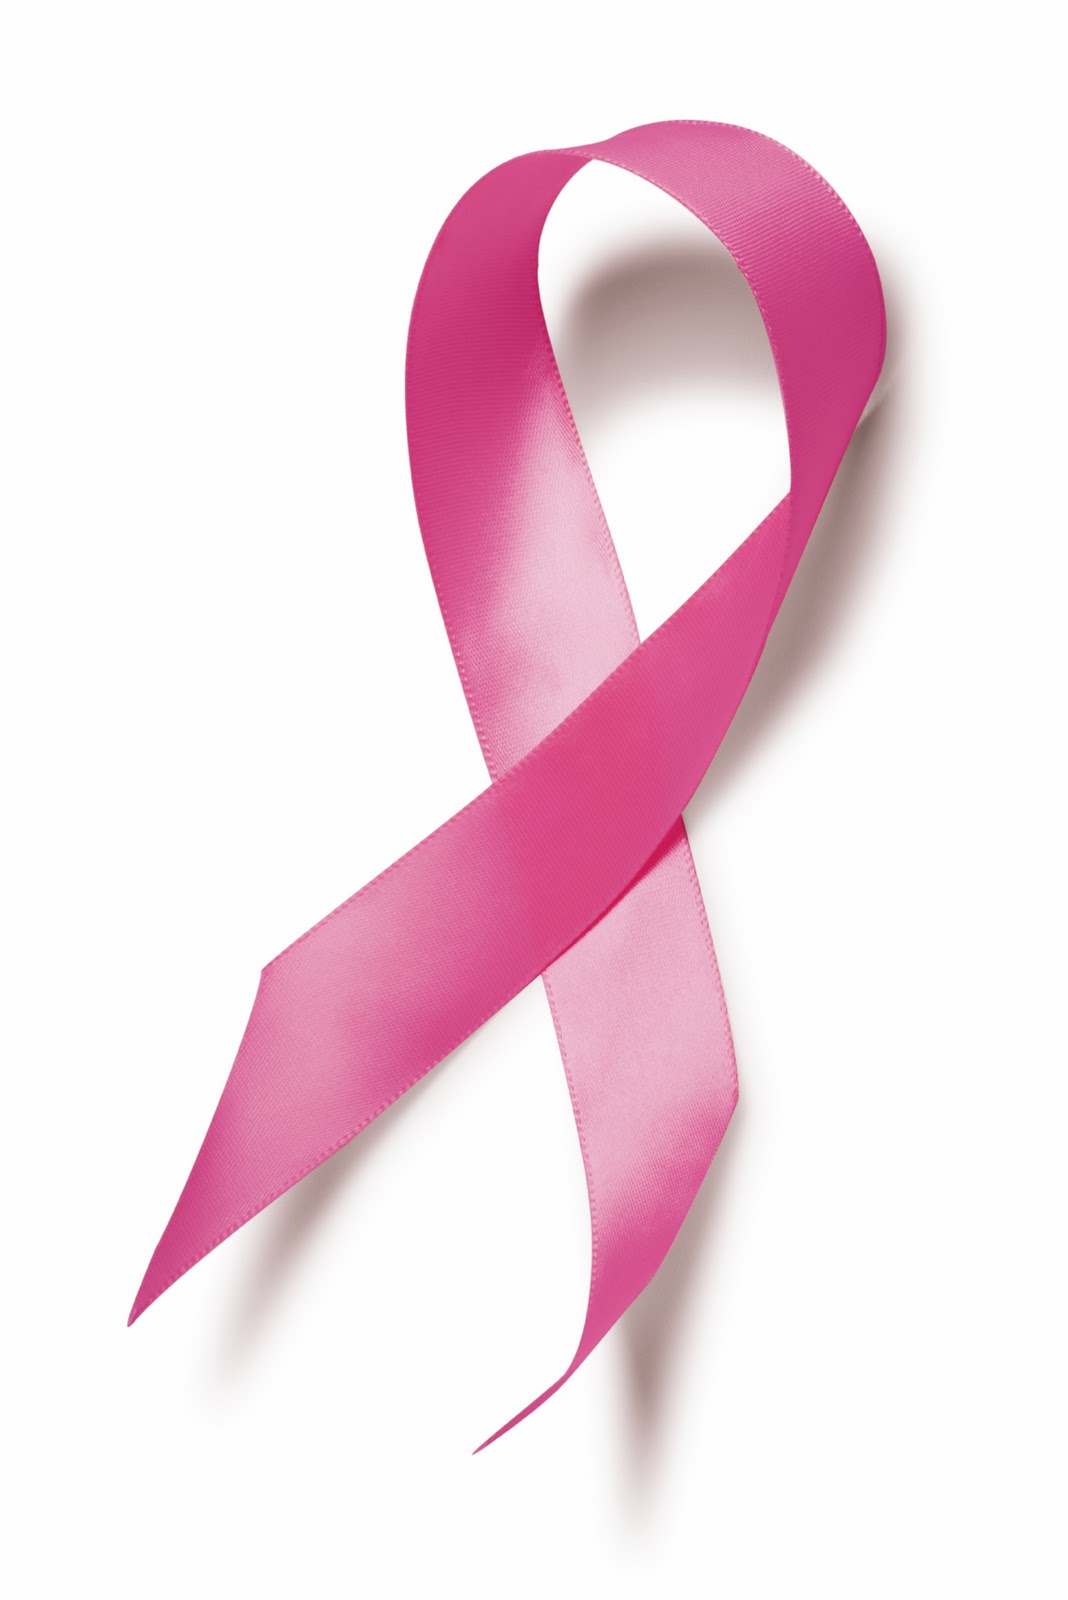 breast-cancer-symbol-clip-art-pink-ribbon-tattoo-page-2-clipart-best